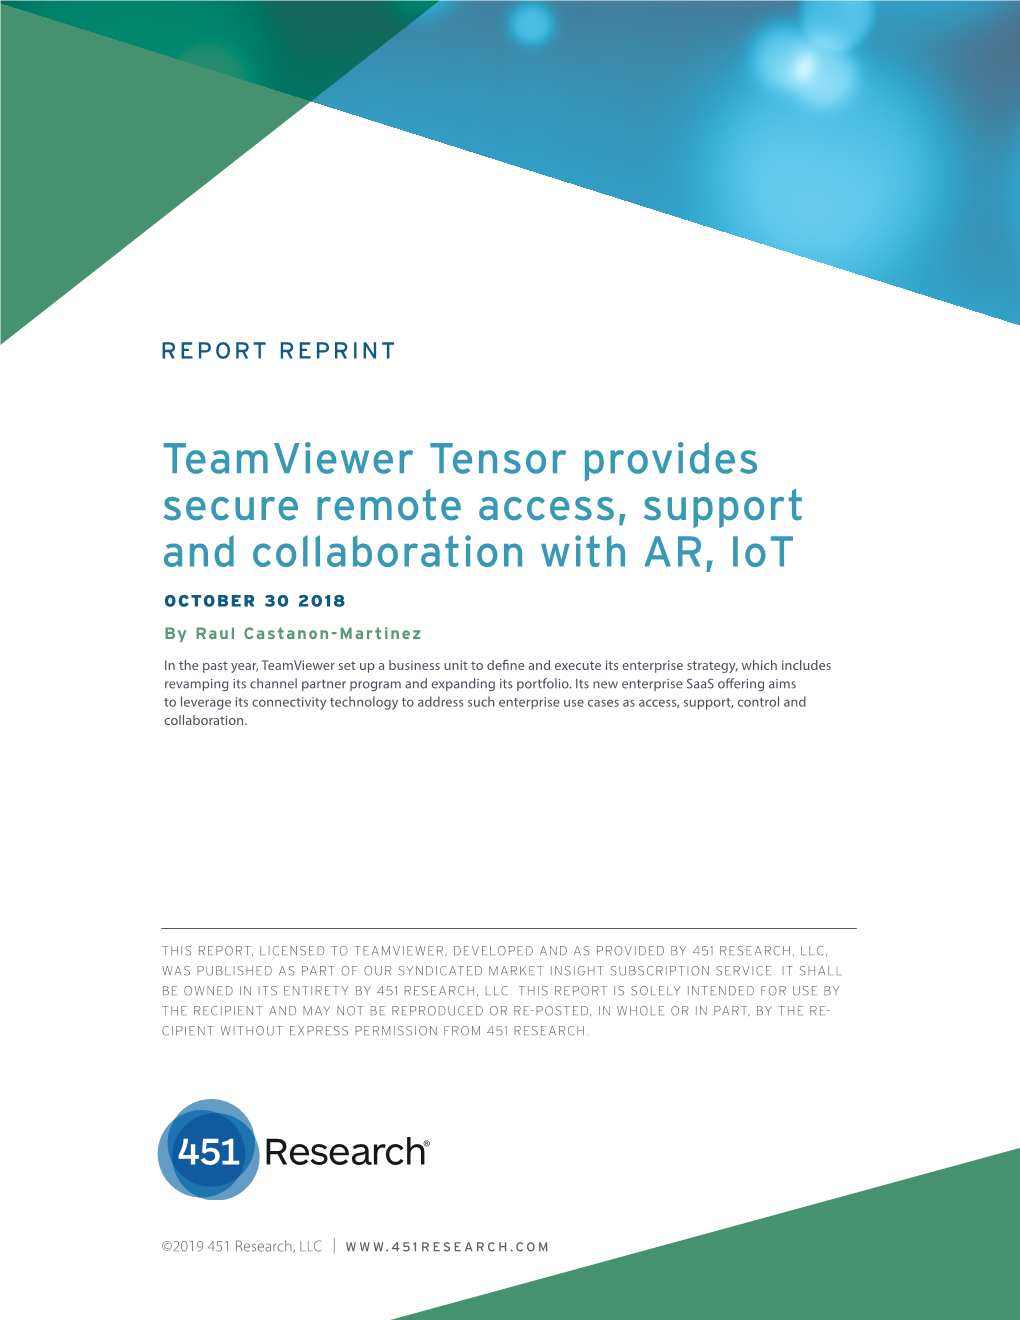 Teamviewer Tensor Provides Secure Remote Access, Support and Collaboration with AR, Iot